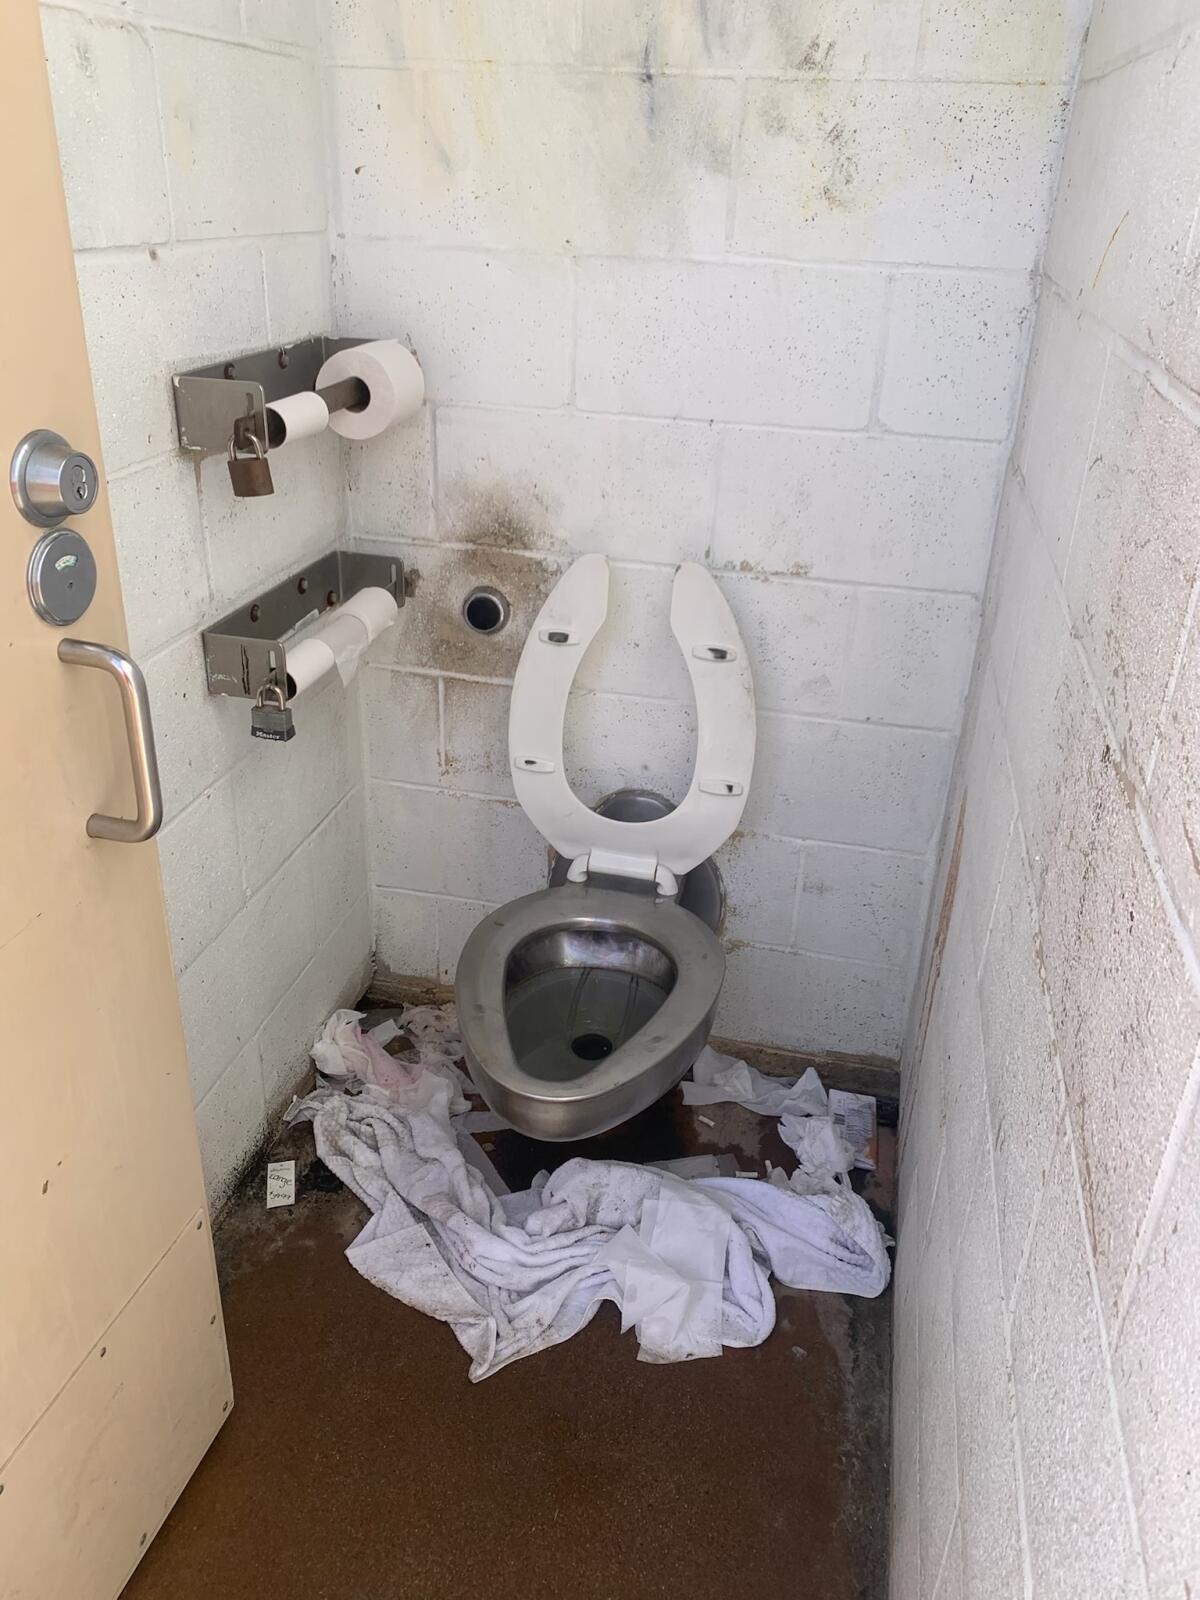 This Kellogg Park toilet shows the state of the "comfort station" restrooms Aug. 14.